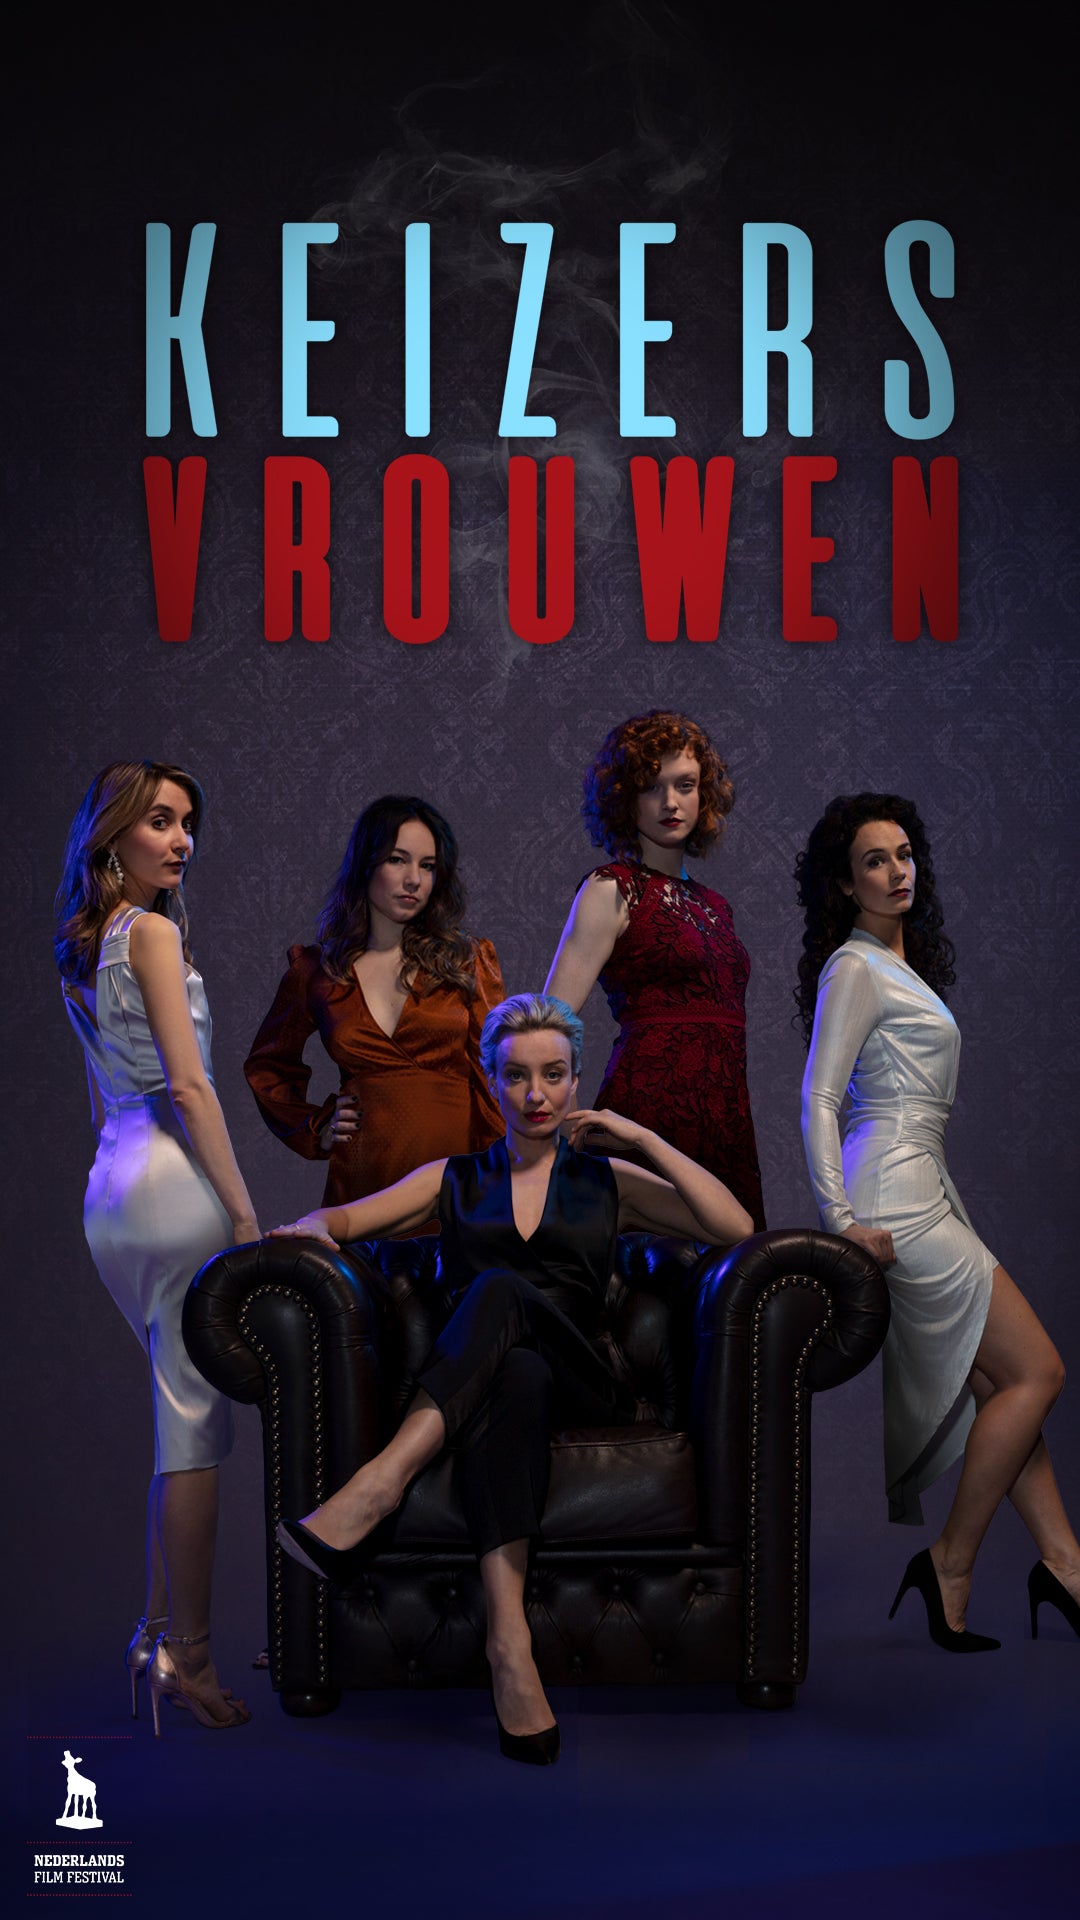 TV ratings for Keizersvrouwen in Netherlands. NPO 3 TV series